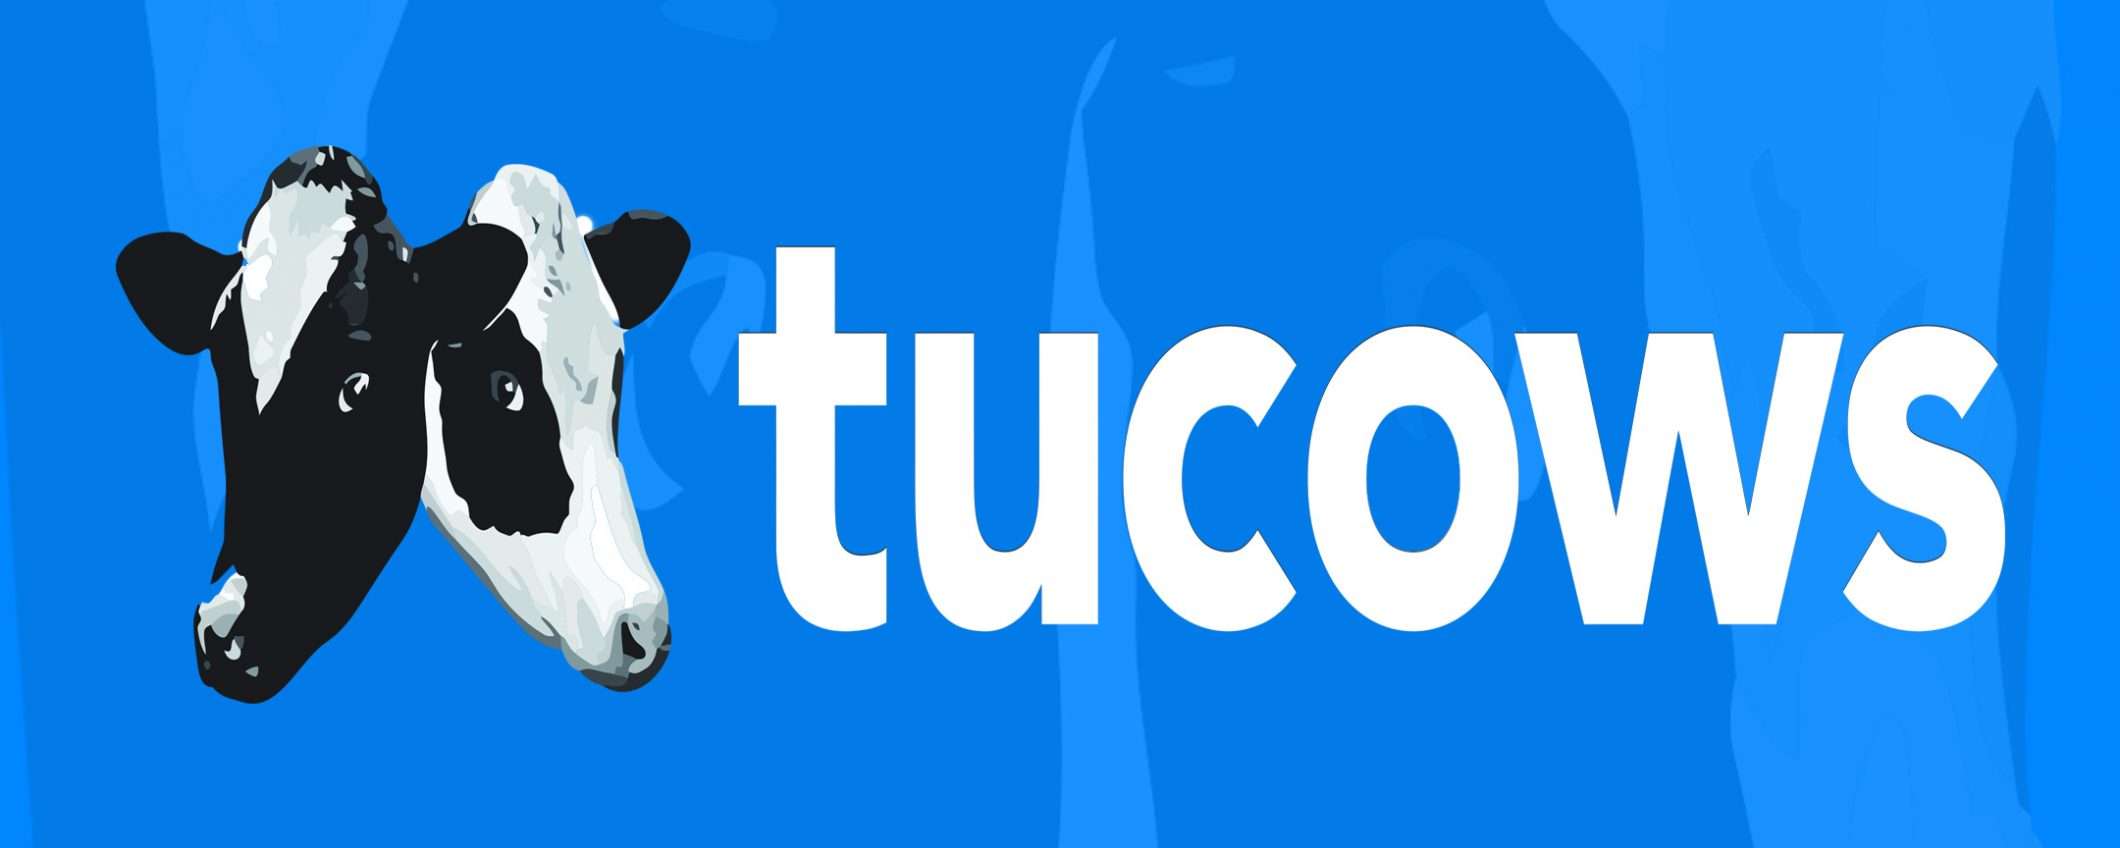 Tucows ferma i download: 1993-2021